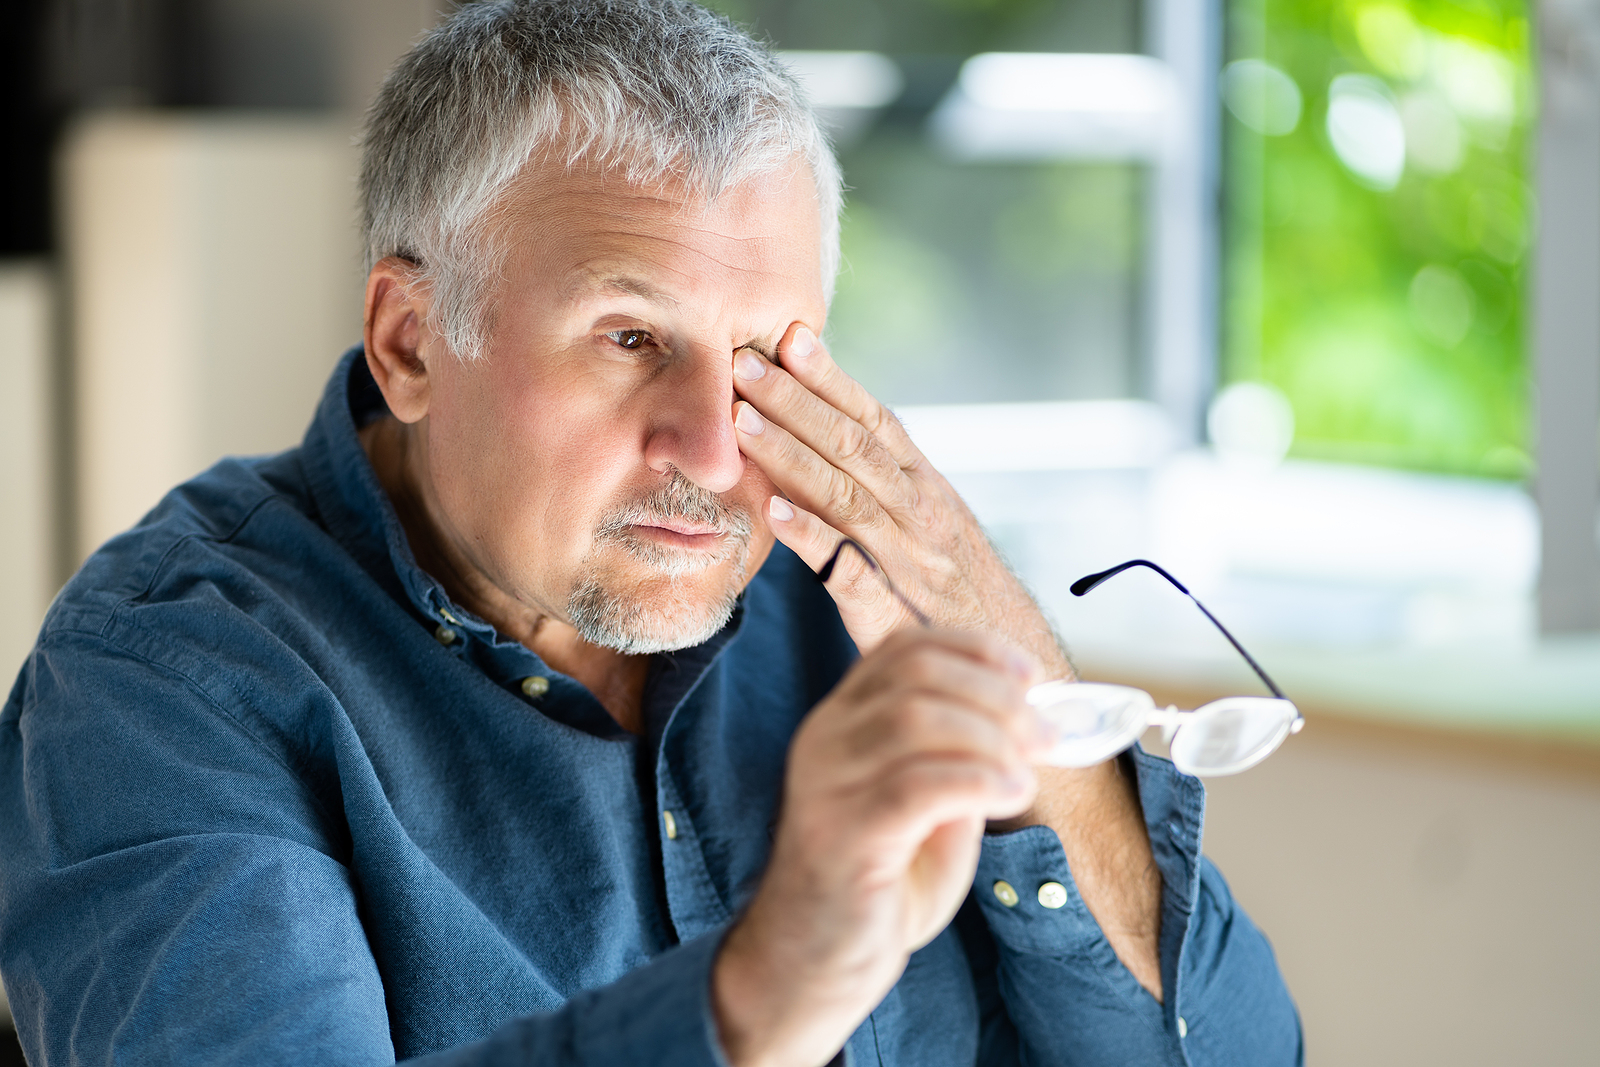 Home Care Services in St. Charles IL: Eye Injury Prevention